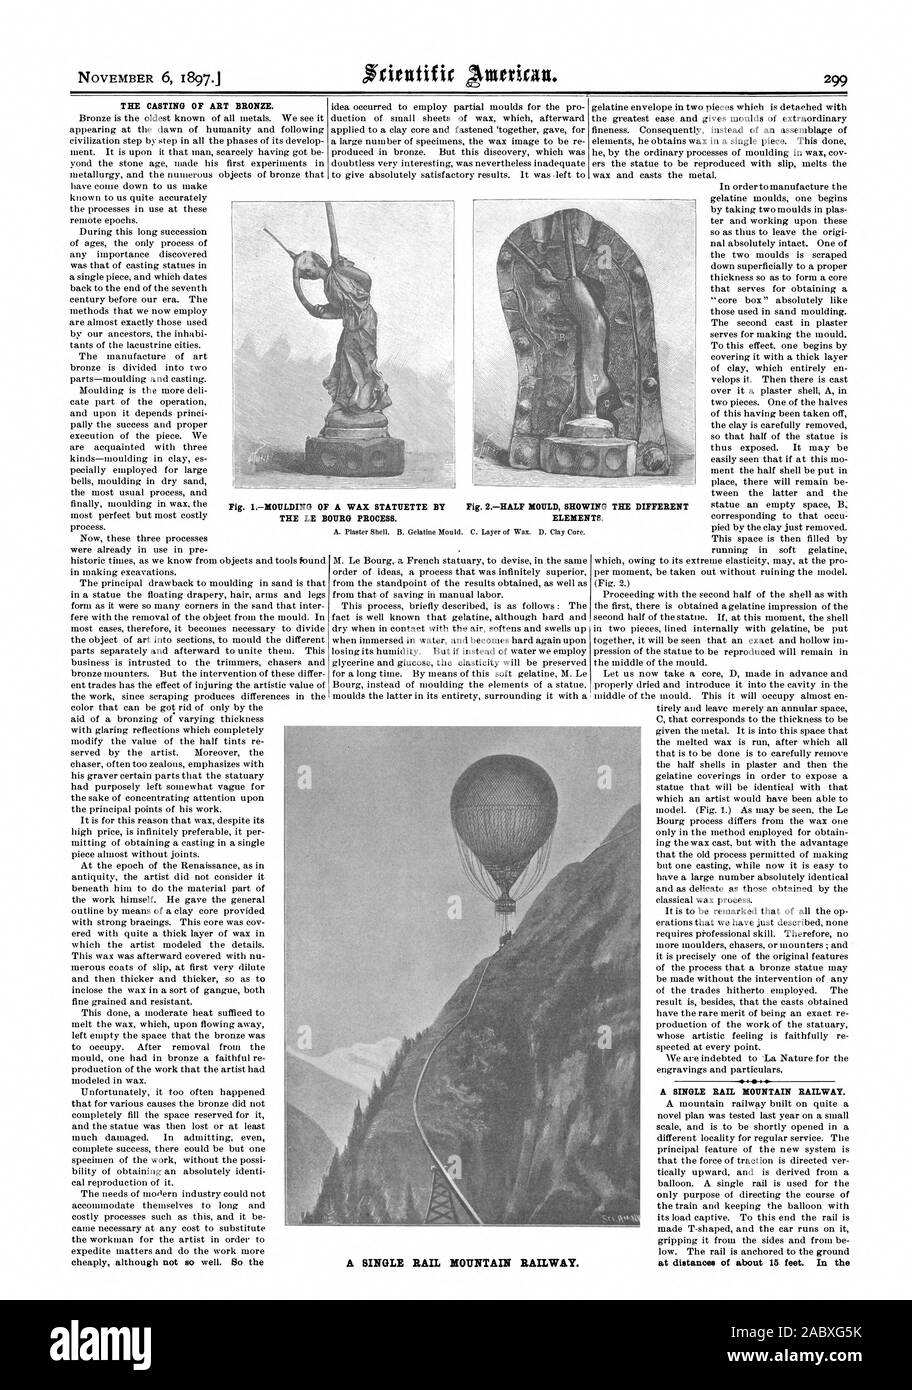 THE CASTING OF ART BRONZE. A SINGLE RAIL MOUNTAIN RAILWAY. at distances of about 15 feet. In the Fig. IMOULDING OF A WAX STATUETTE BY THE LE BOURG PROCESS. Fig. 2HALF MOULD SHOWING THE DIFFERENT ELEMENTS. A SINGLE RAIL MOUNTAIN RAILWAY., scientific american, 1897-11-06 Stock Photo